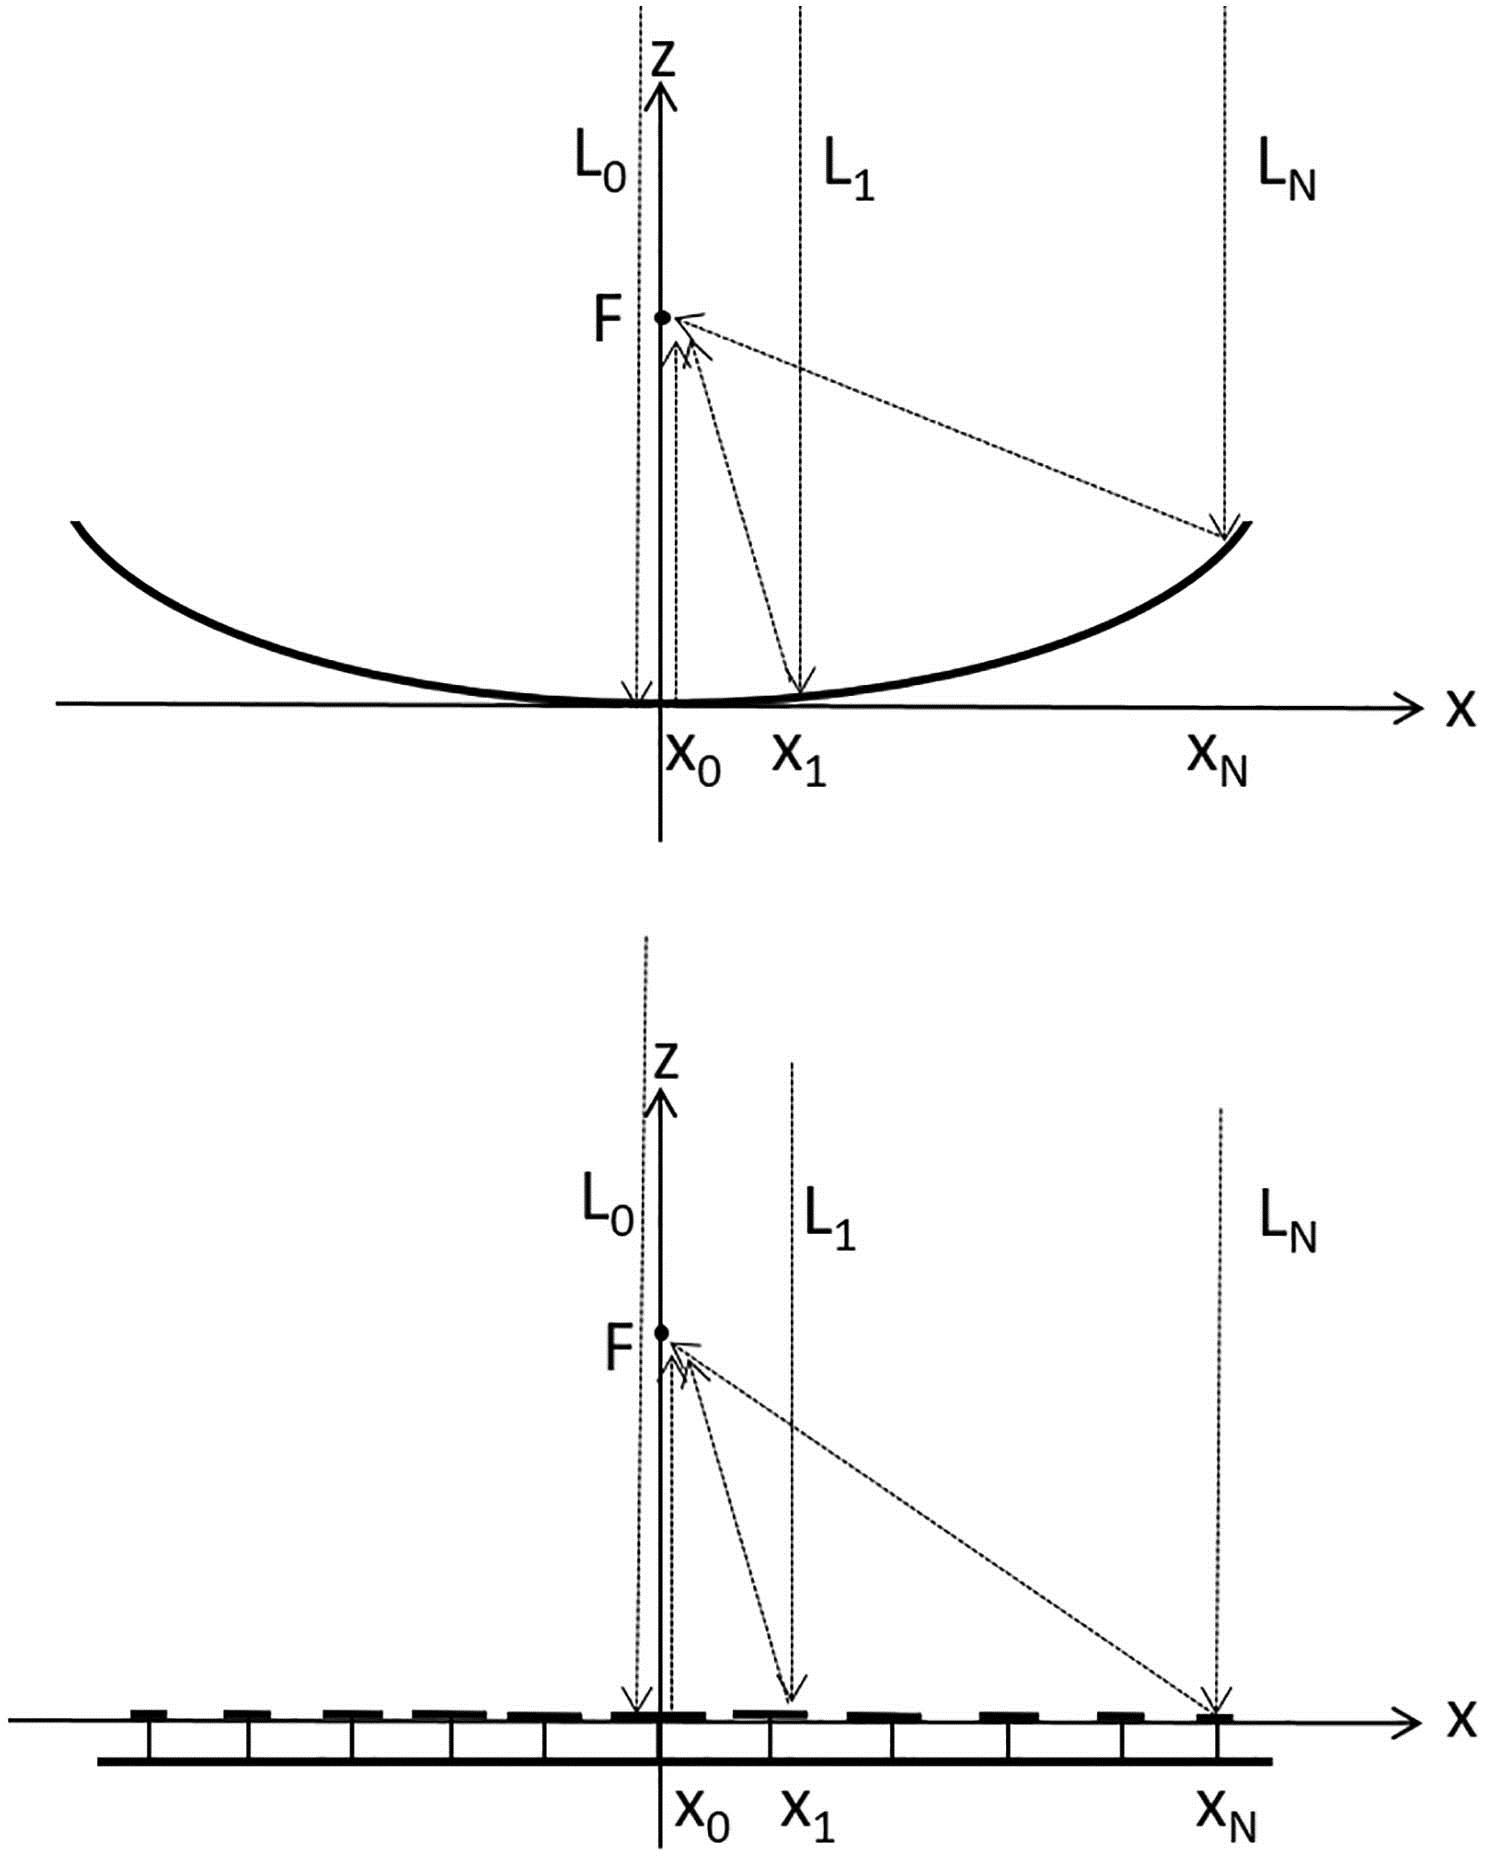 Top: Side view of parabolic mirror and parallel rays L1, L2, and L3 reflected to focal point F due to the mirror geometry. Bottom: Side view of FLAPS structure and parallel rays L1, L2, and L3 reflected to the same focal point F due to the phase shift provided by each cell of the FLAPS.